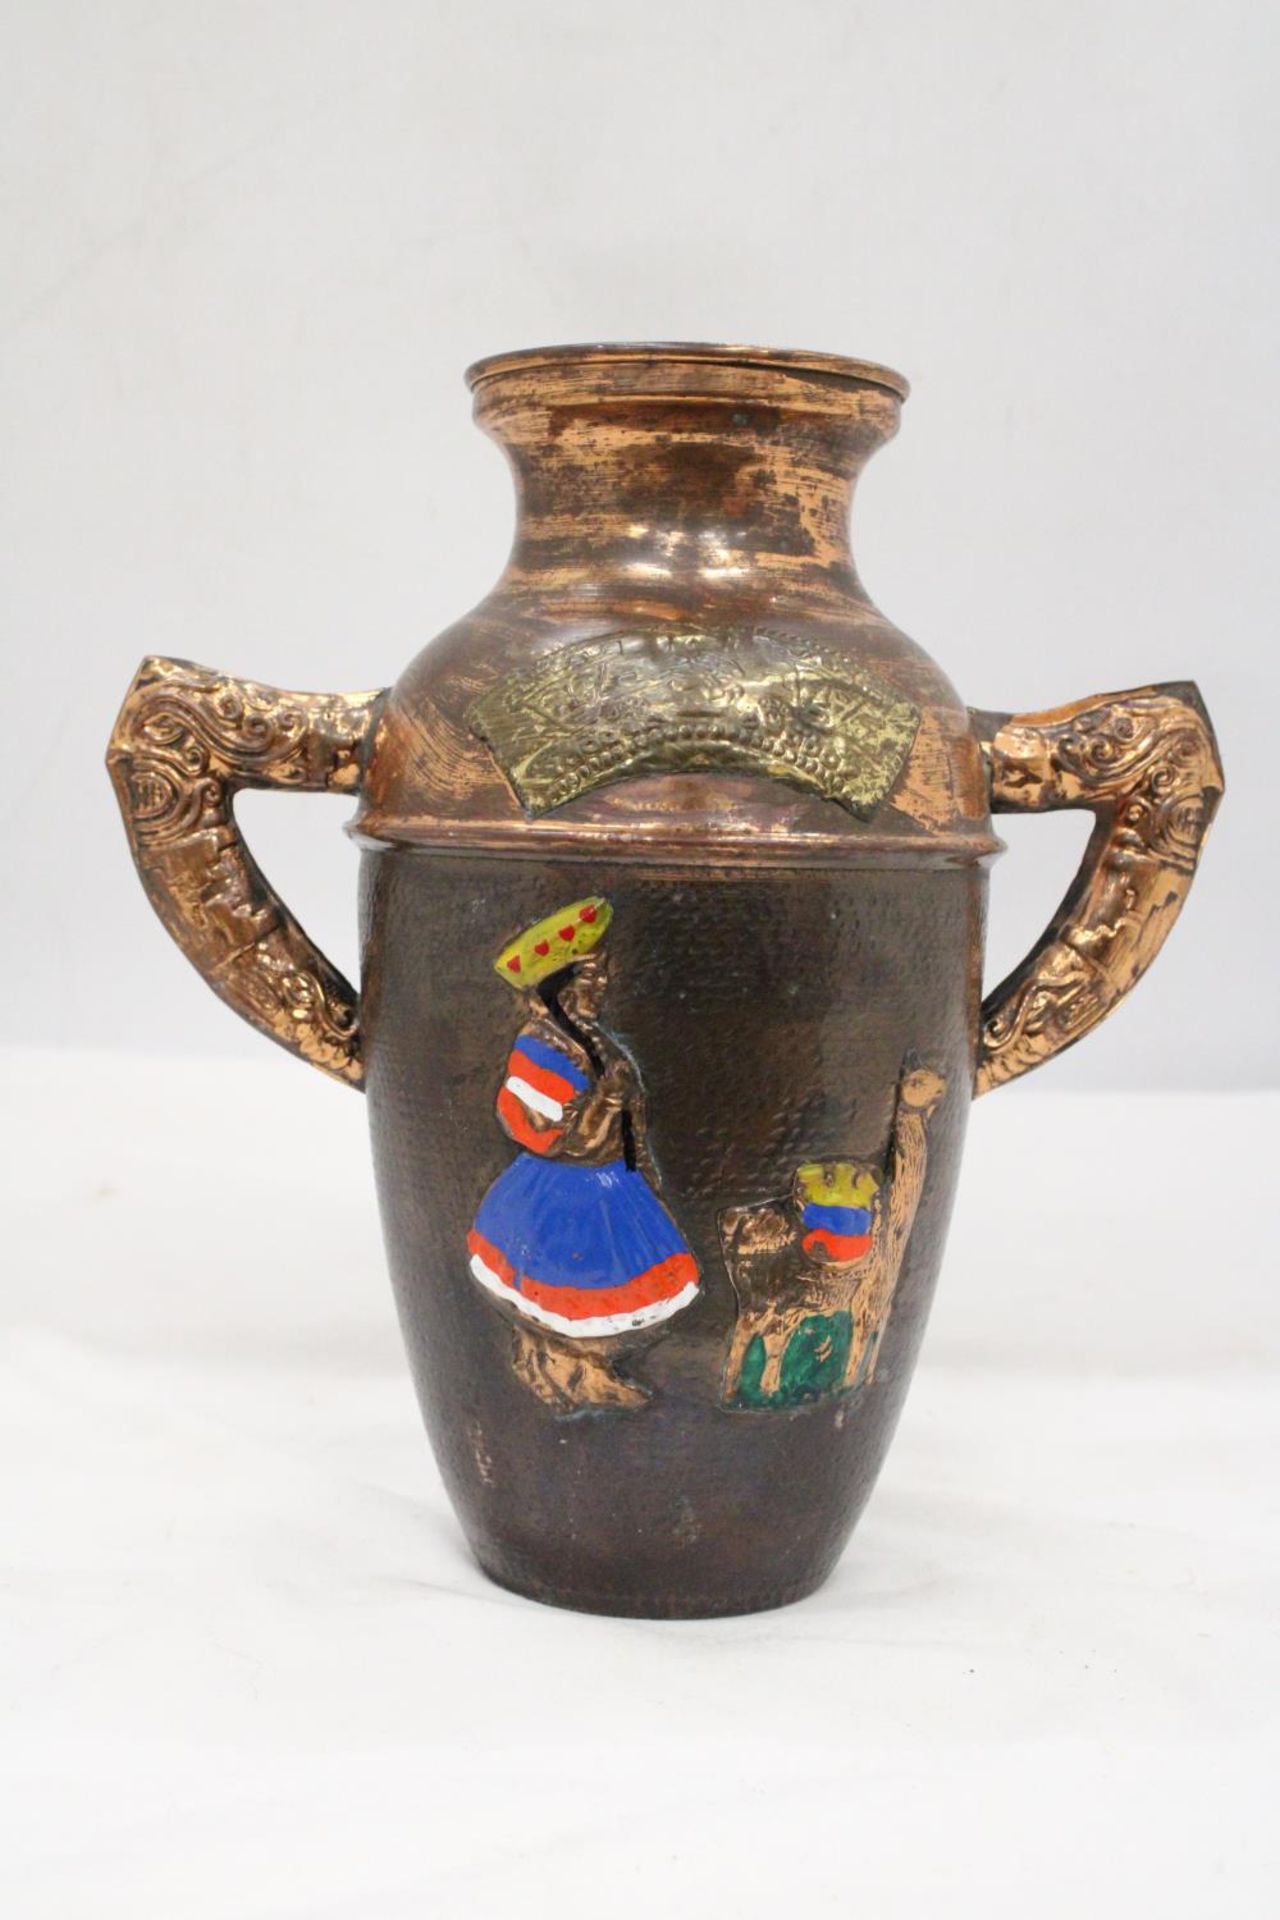 A VINTAGE COLOMBIAN MAYAN DECORATED COPPER VASE